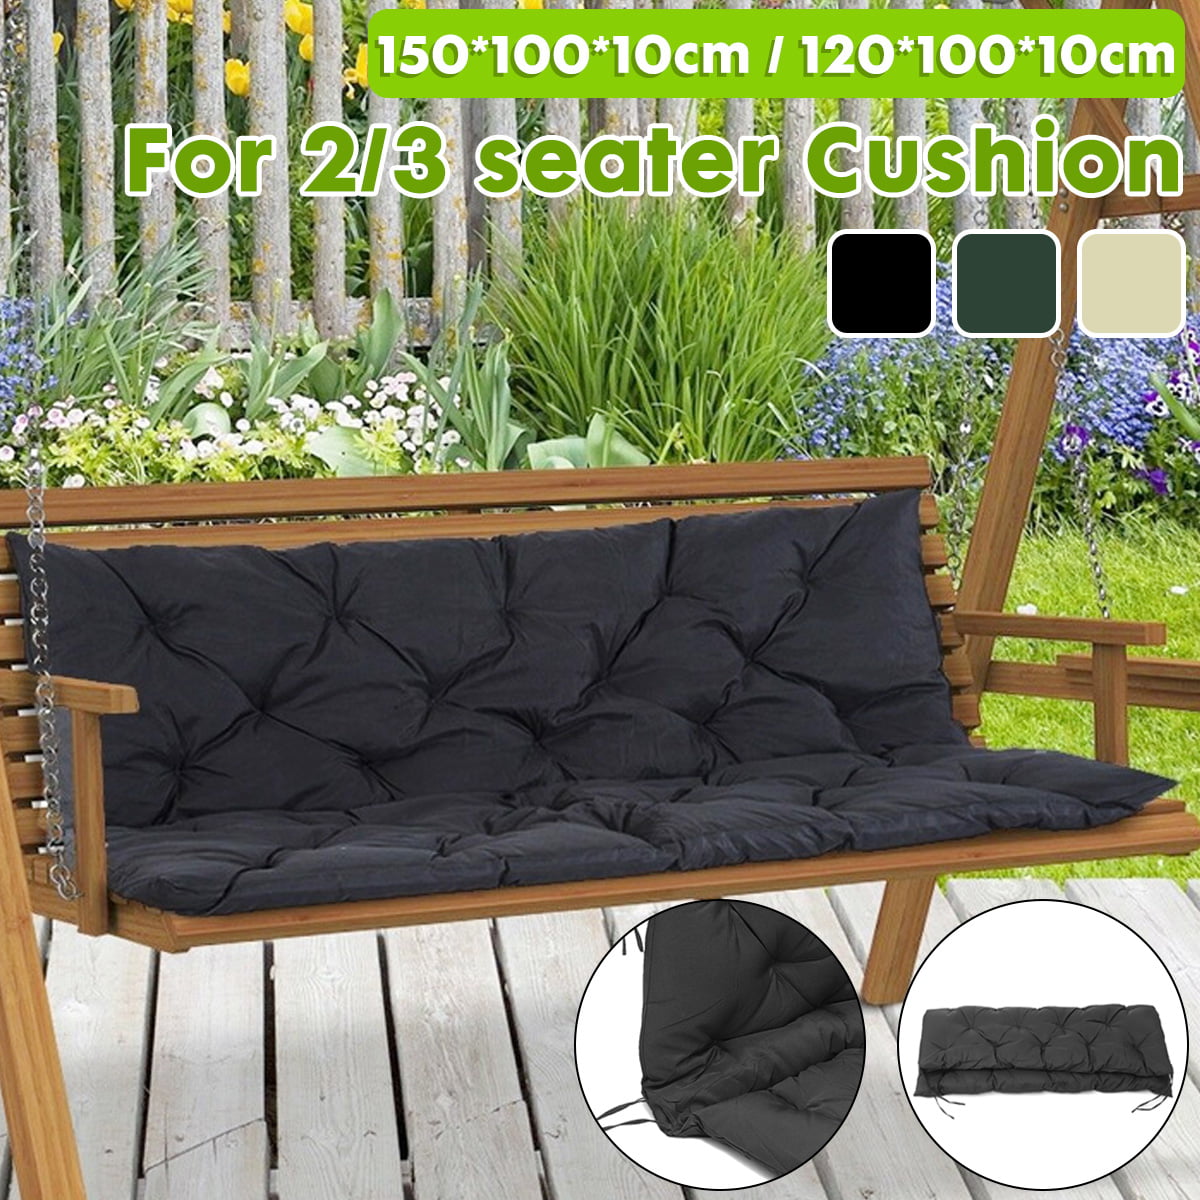 Garden Bench Cushion,Patio Lounge Chairs Cushions,Bench Cushion Swing Cushion for Lounger Garden Furniture Patio Outdoor Indoor 51/'/' x 20/'/'